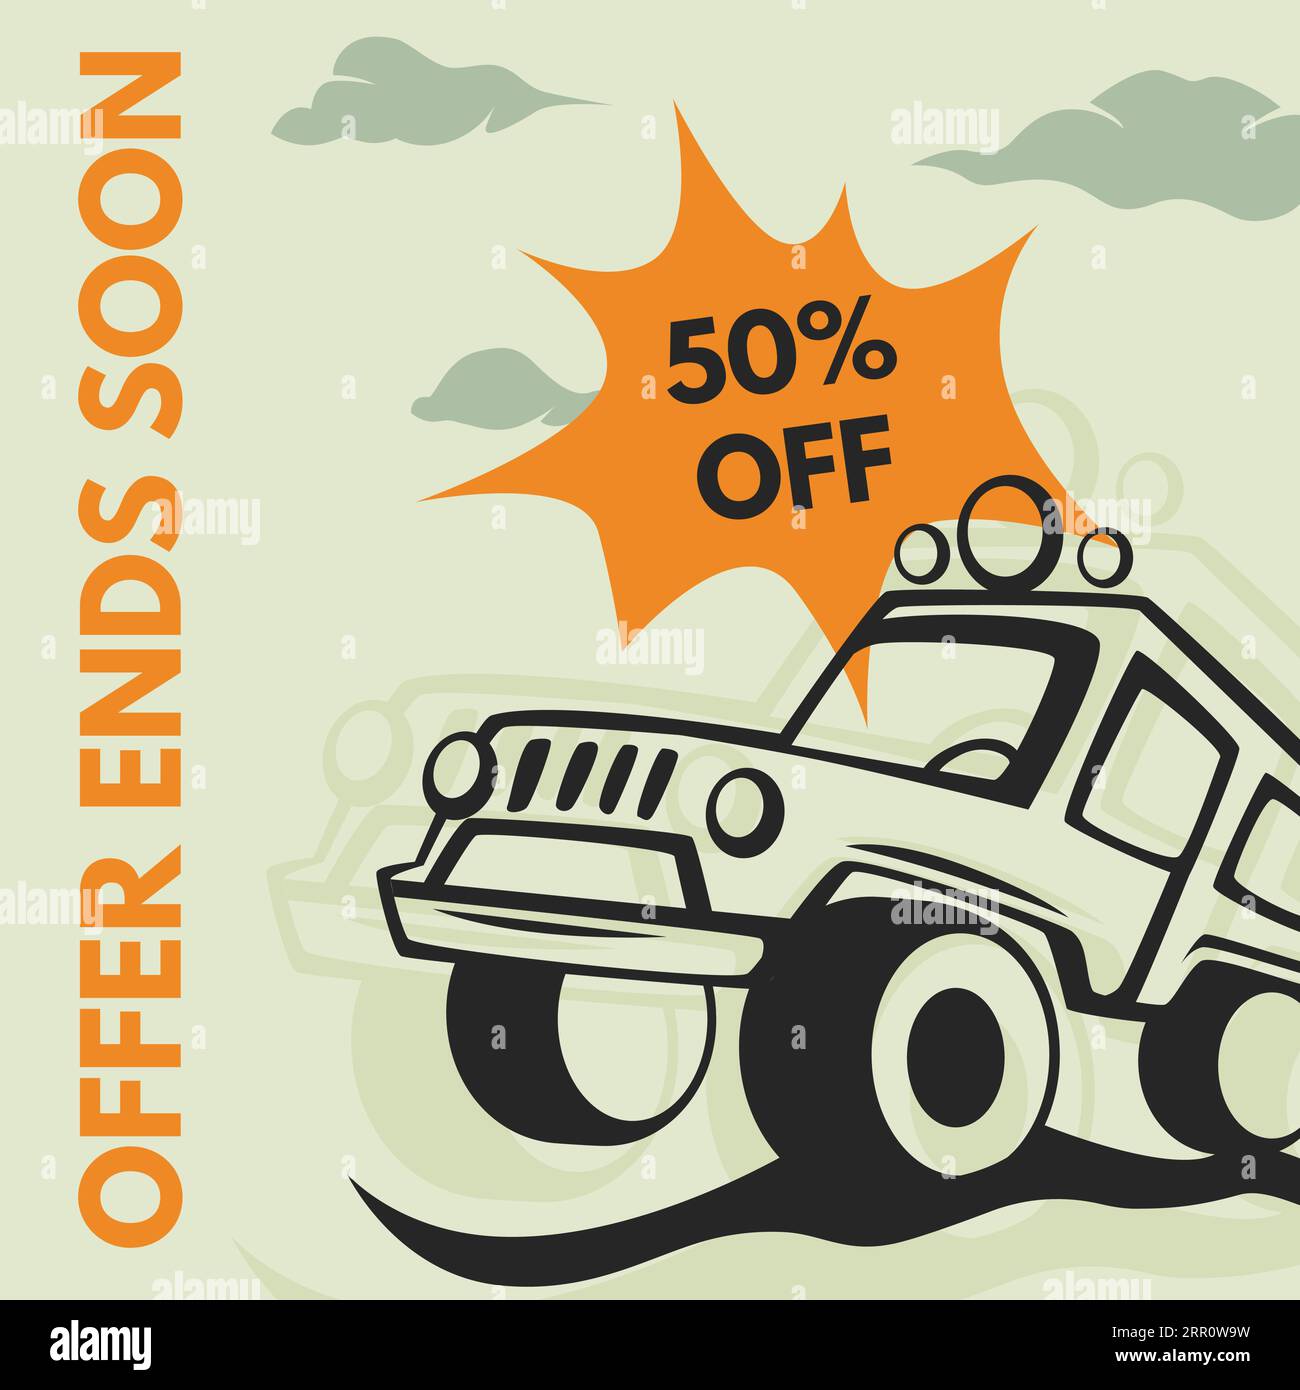 Extreme adventure driving, offer ends soon banner Stock Vector